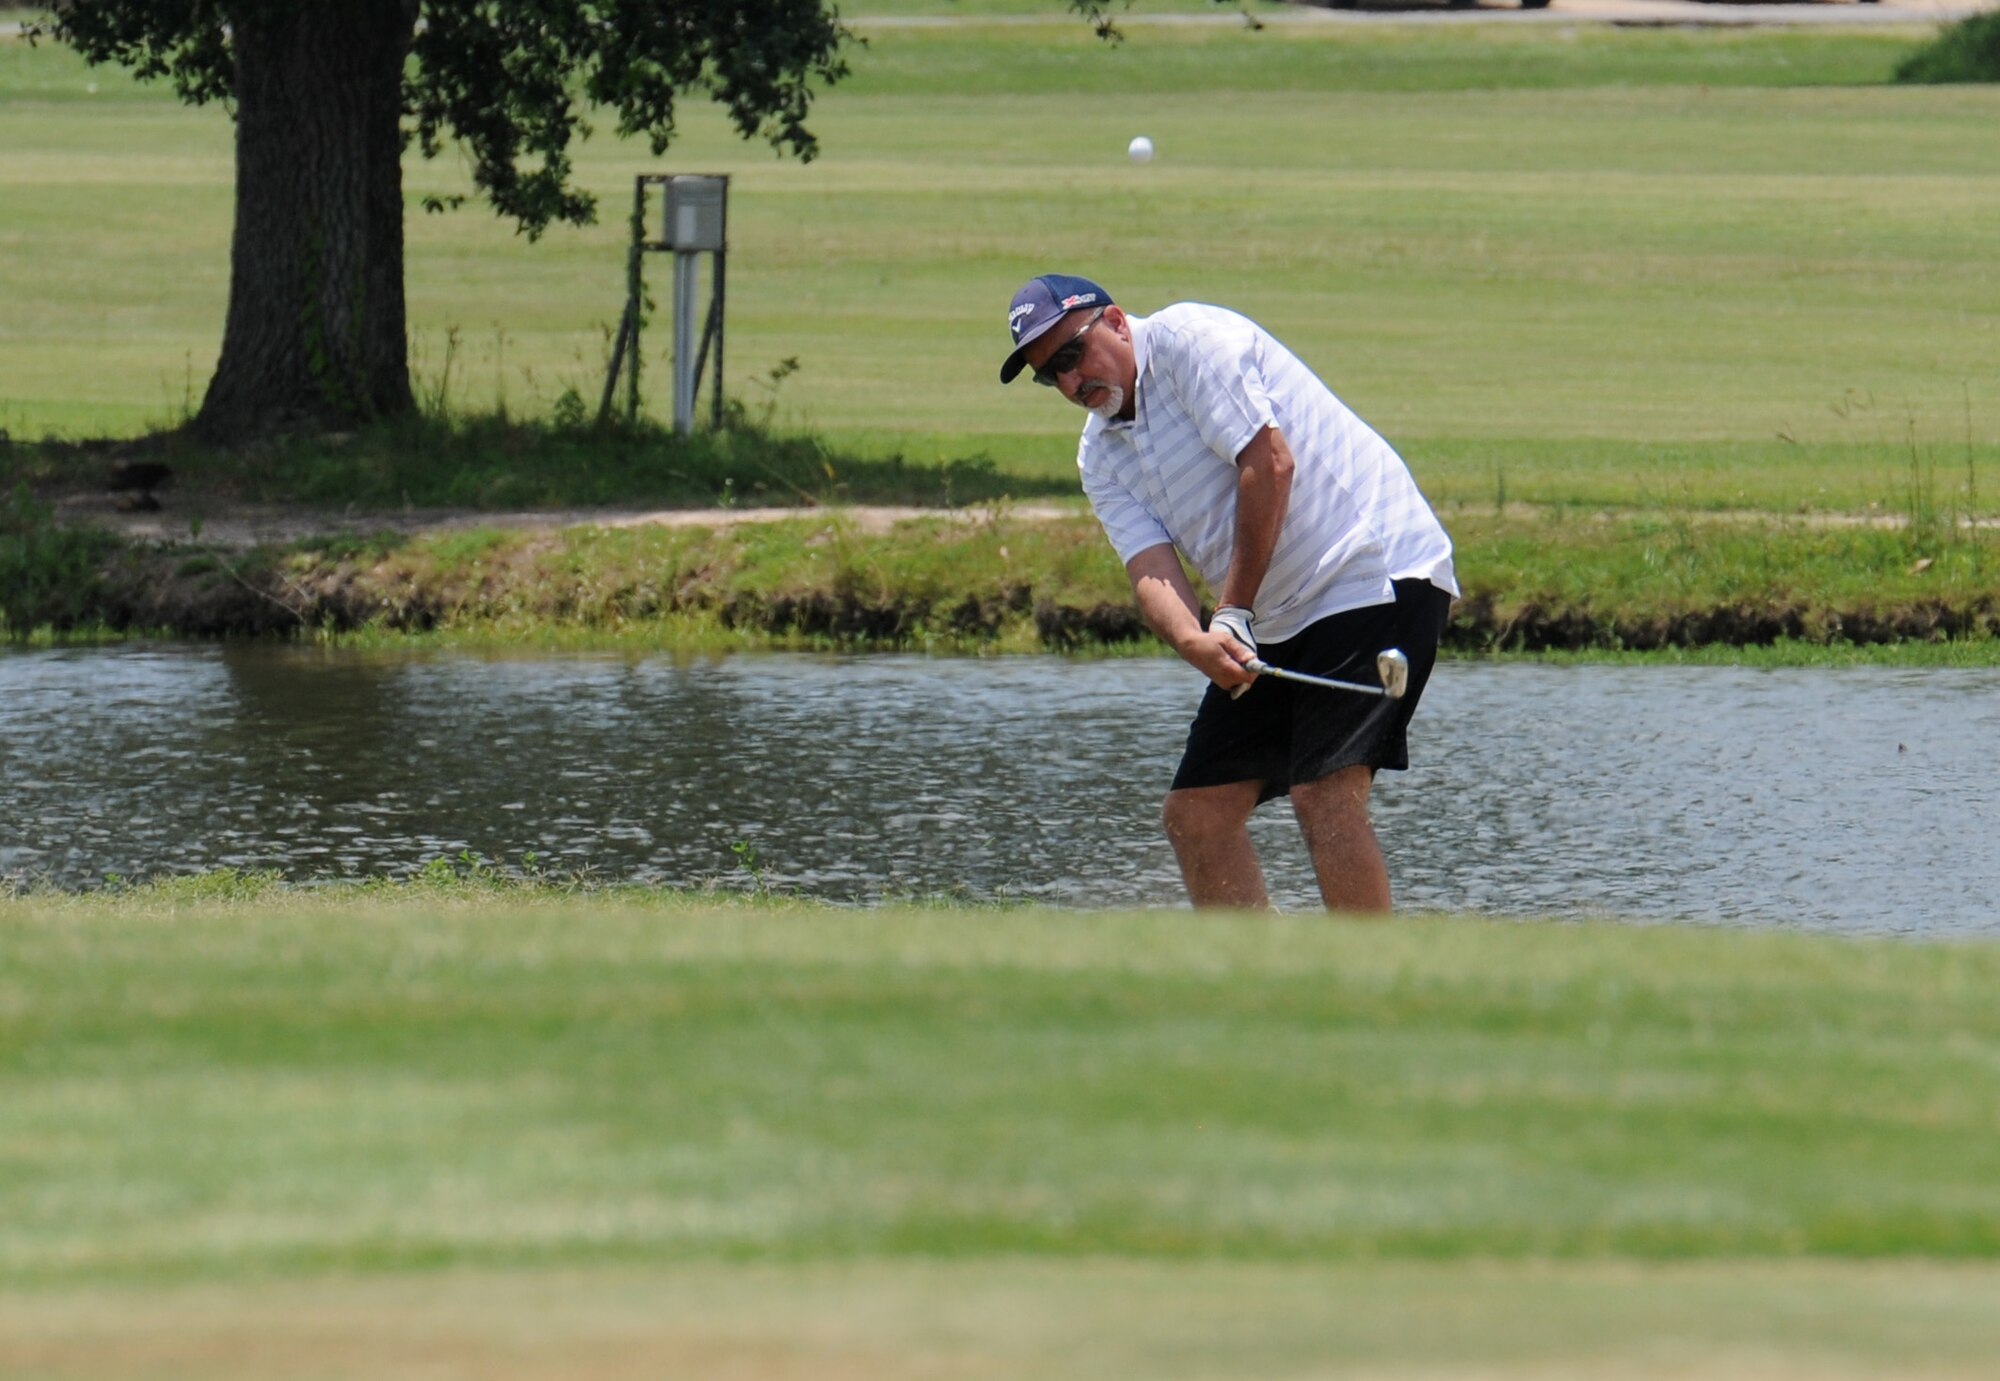 Barry Argento, 403rd Wing comptroller, takes a swing on hole #10 during the Don Wylie Memorial Golf Tournament at the Bay Breeze Golf Course June 17, 2016, Keesler Air Force Base, Miss. The annual tournament raised funds to help the Military & Veterans Affairs committee honor military members.  (U.S. Air Force photo by Kemberly Groue)